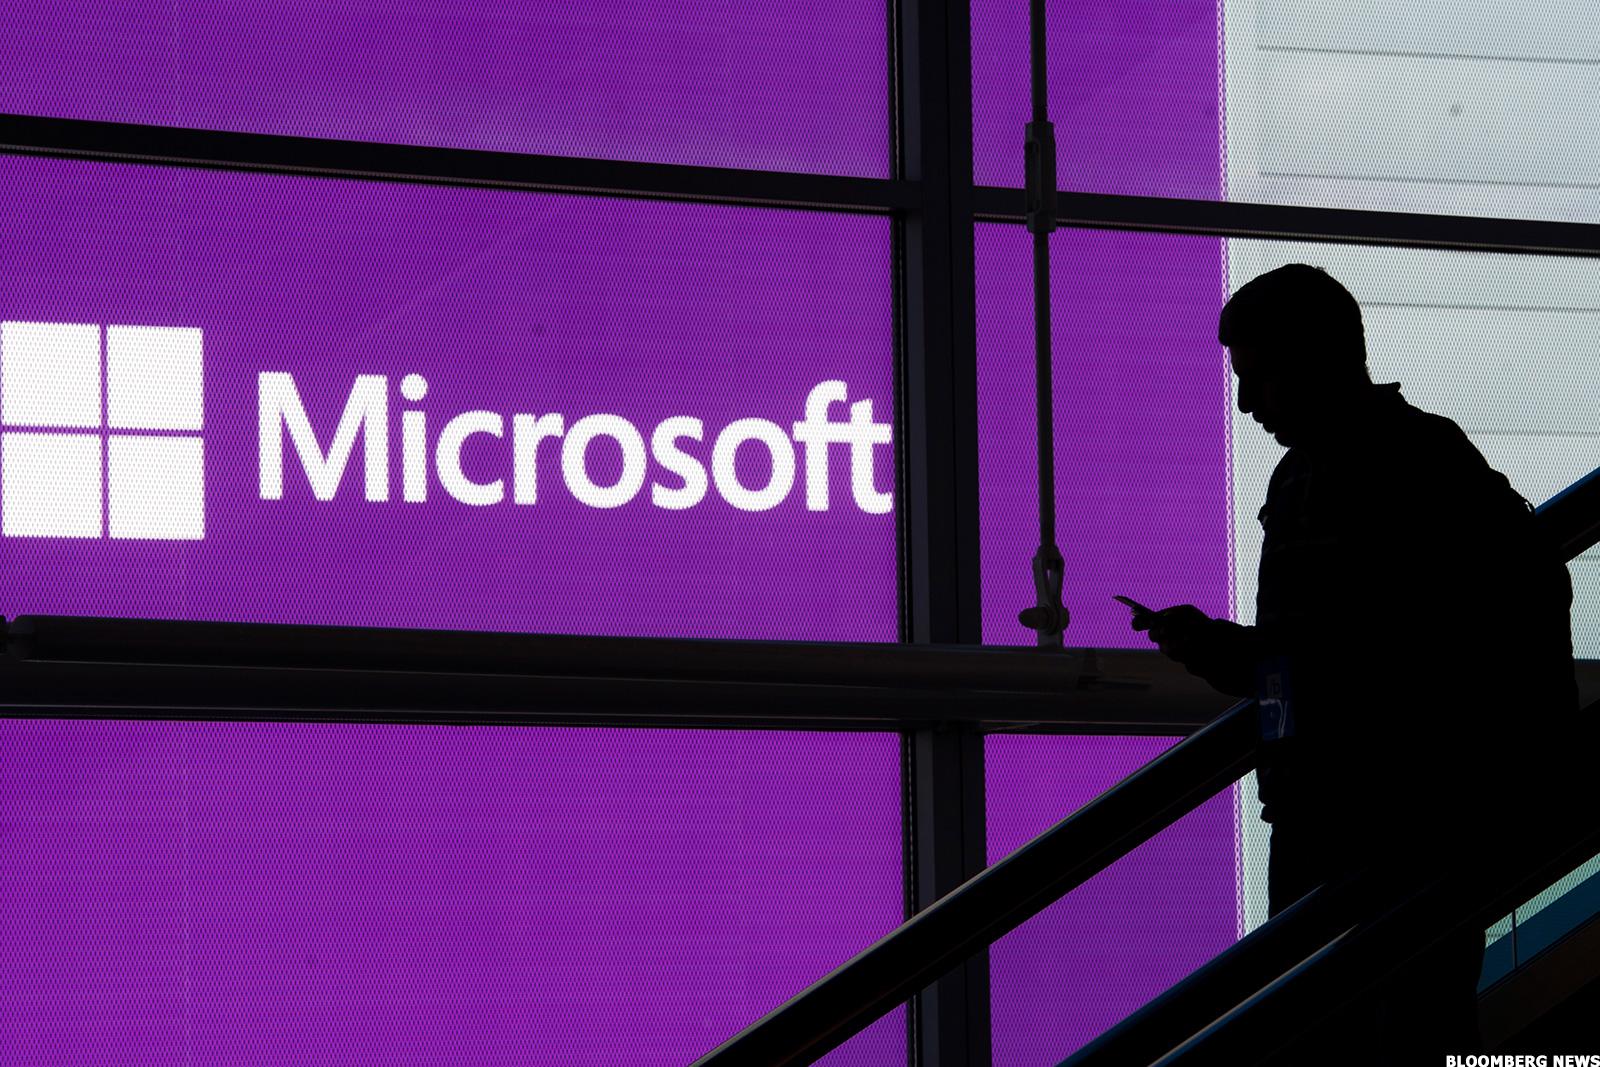 Out of 118 gender discrimination complaints filed by women at Microsoft, only one was deemed 'founded' by the company